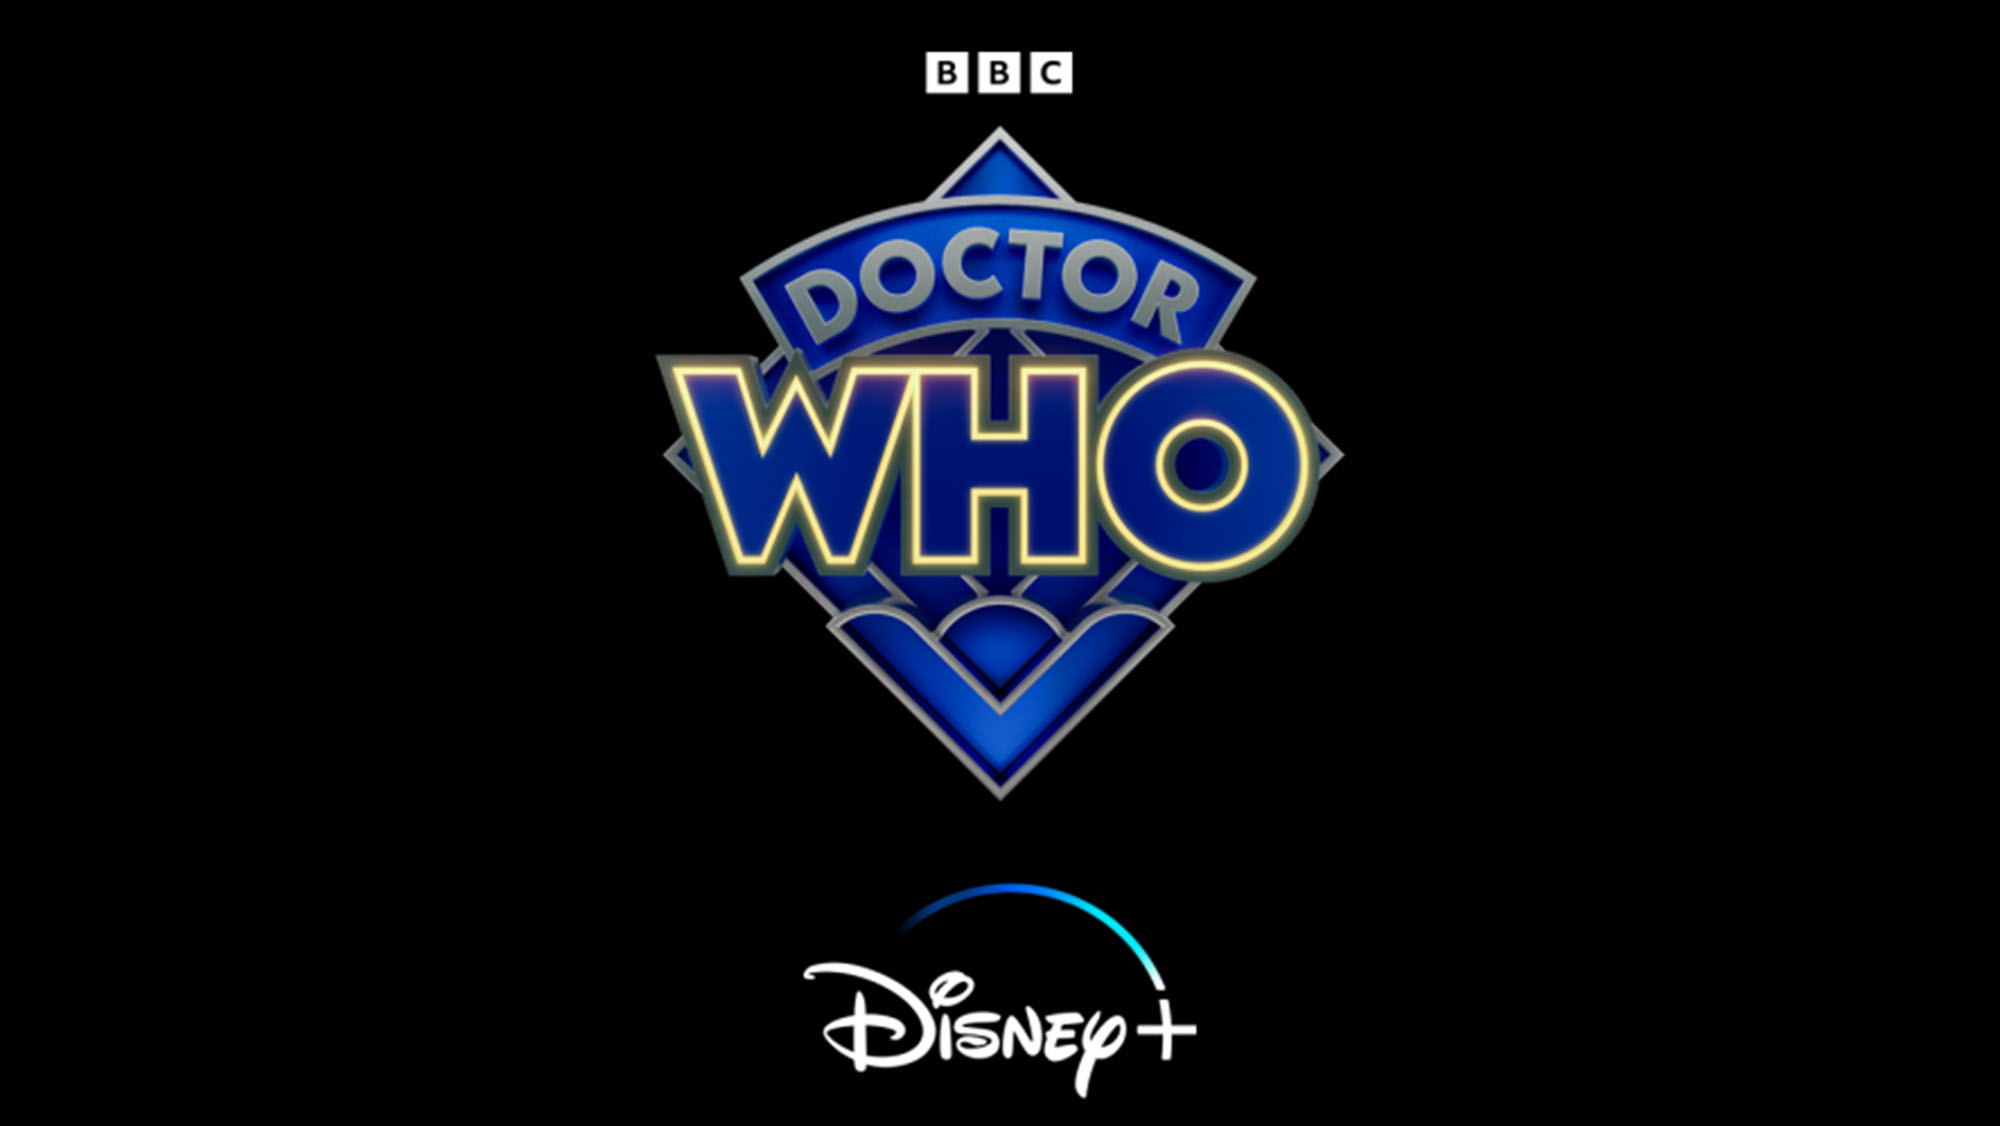 Doctor Who: New episodes from season 14 onwards only on Disney+ - valid from 2023

